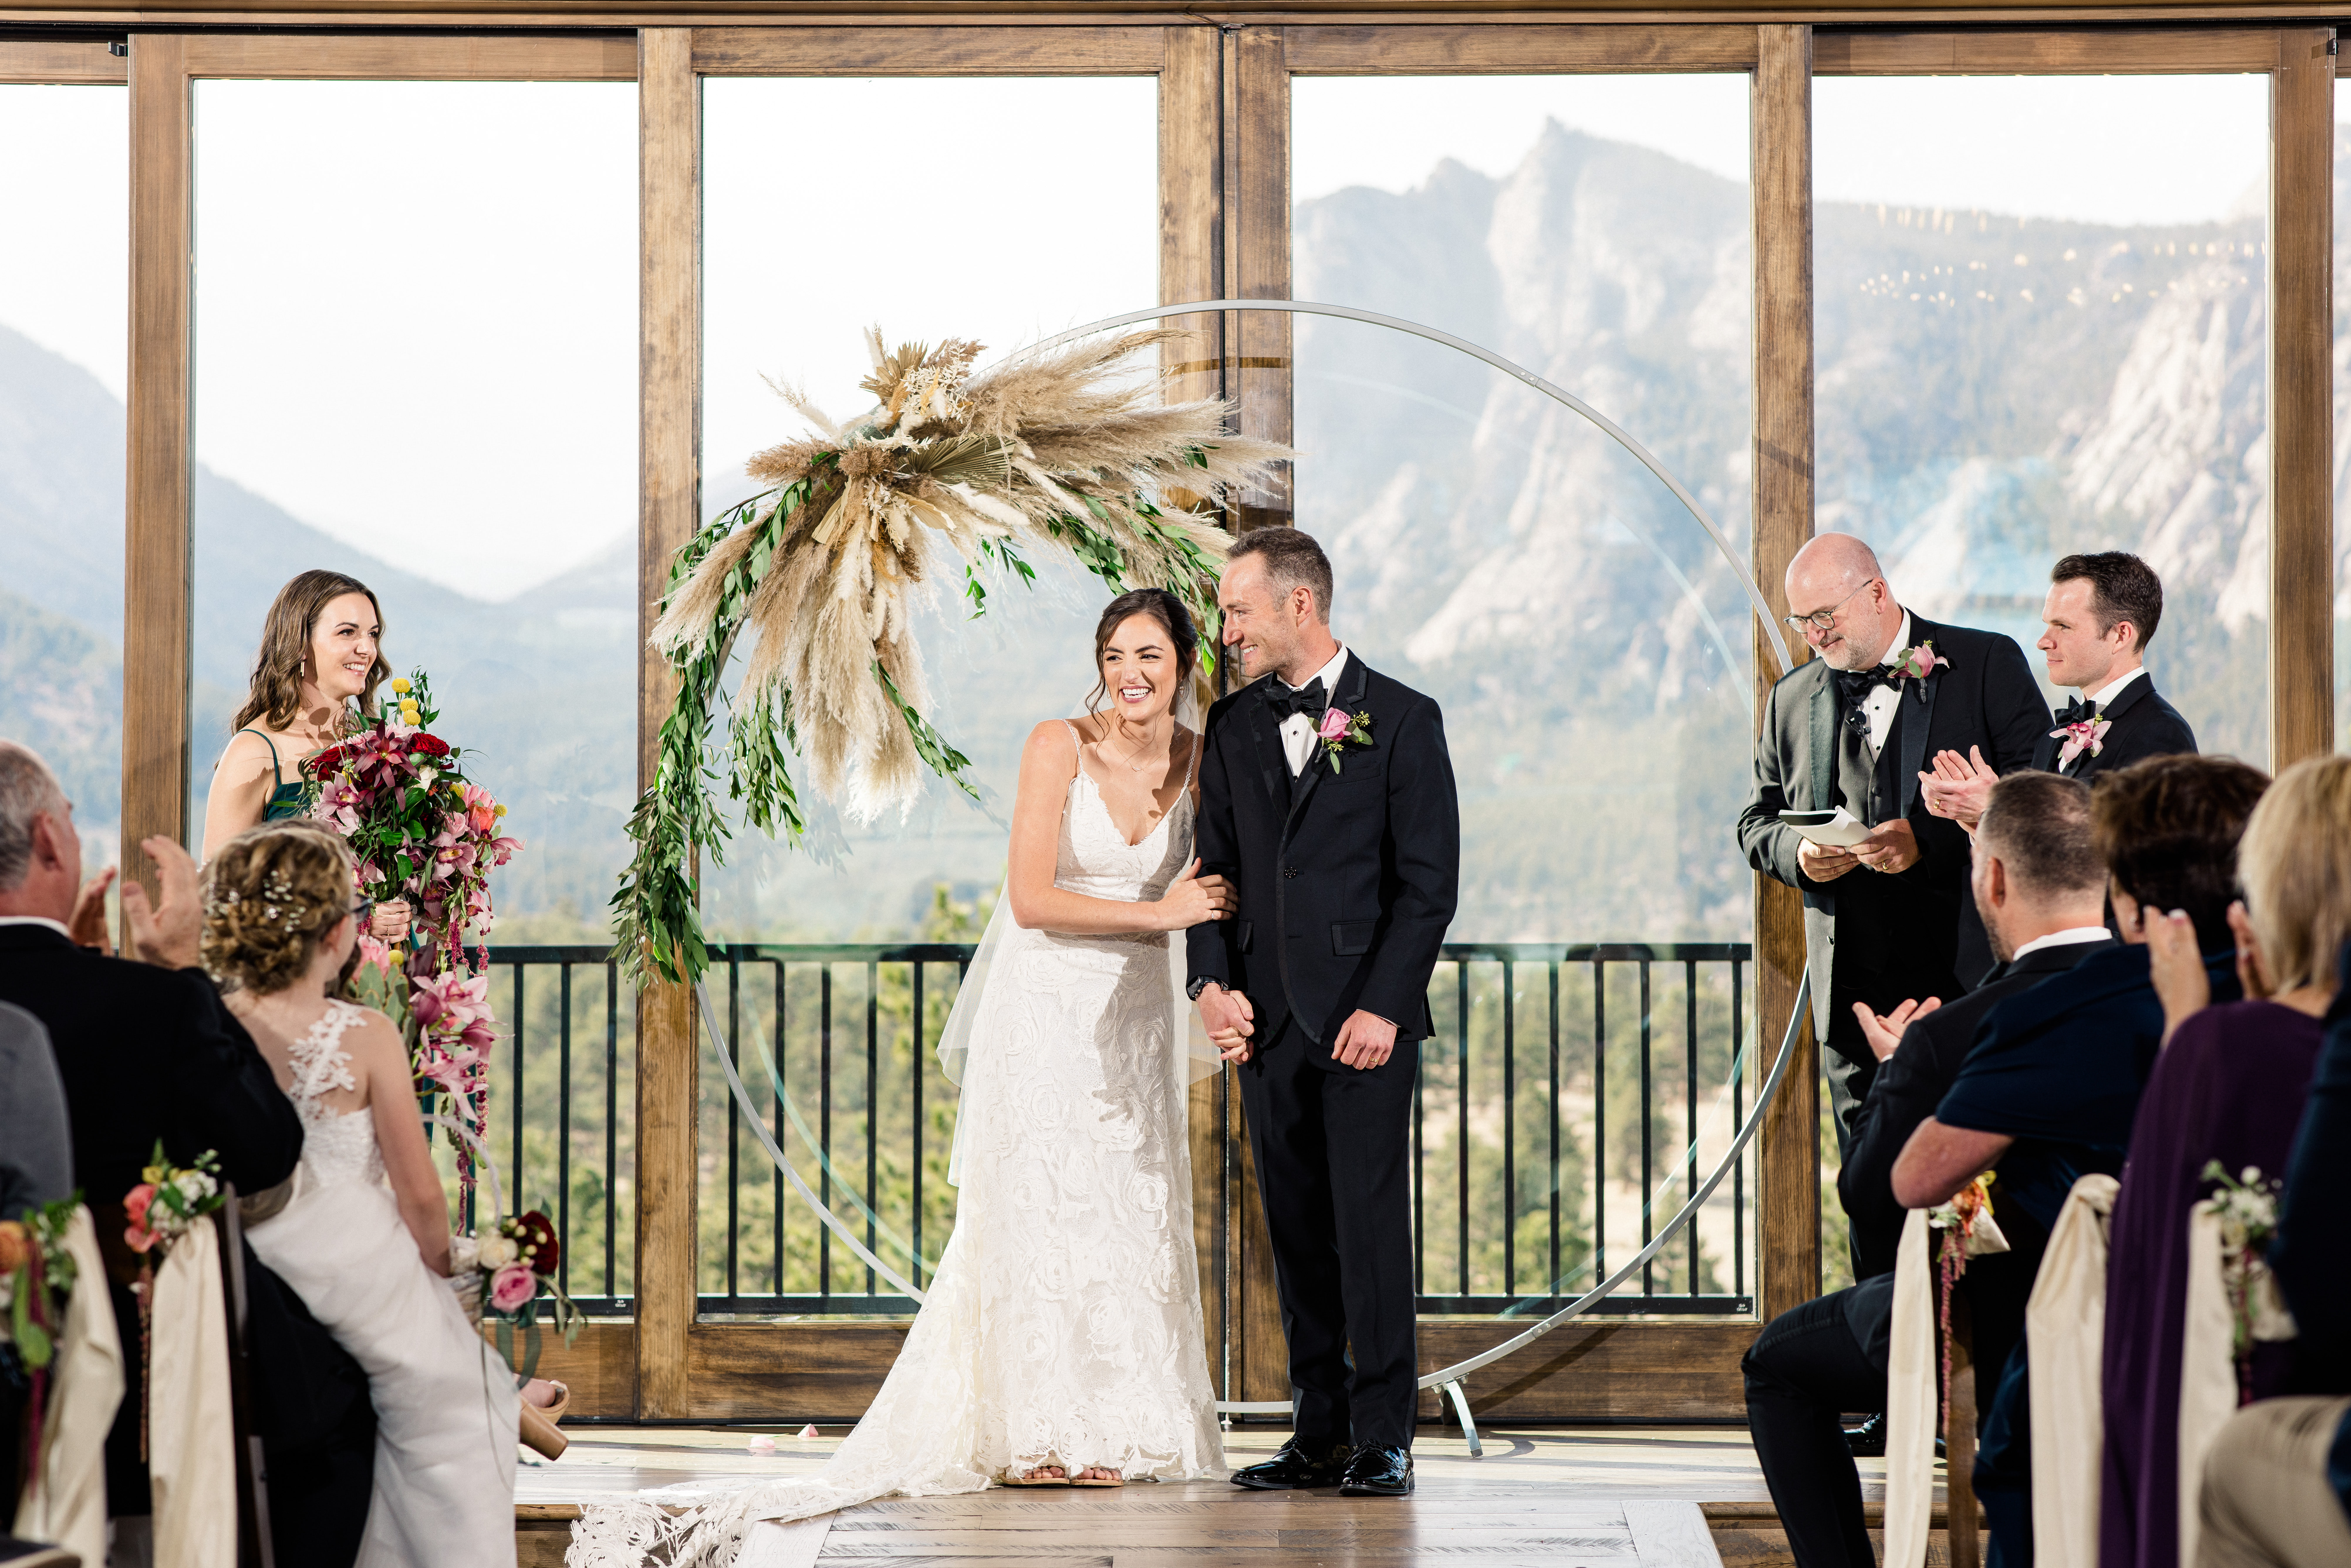 Wedding Ceremony image from the Boulders at Black Canyon Inn in Estes Park